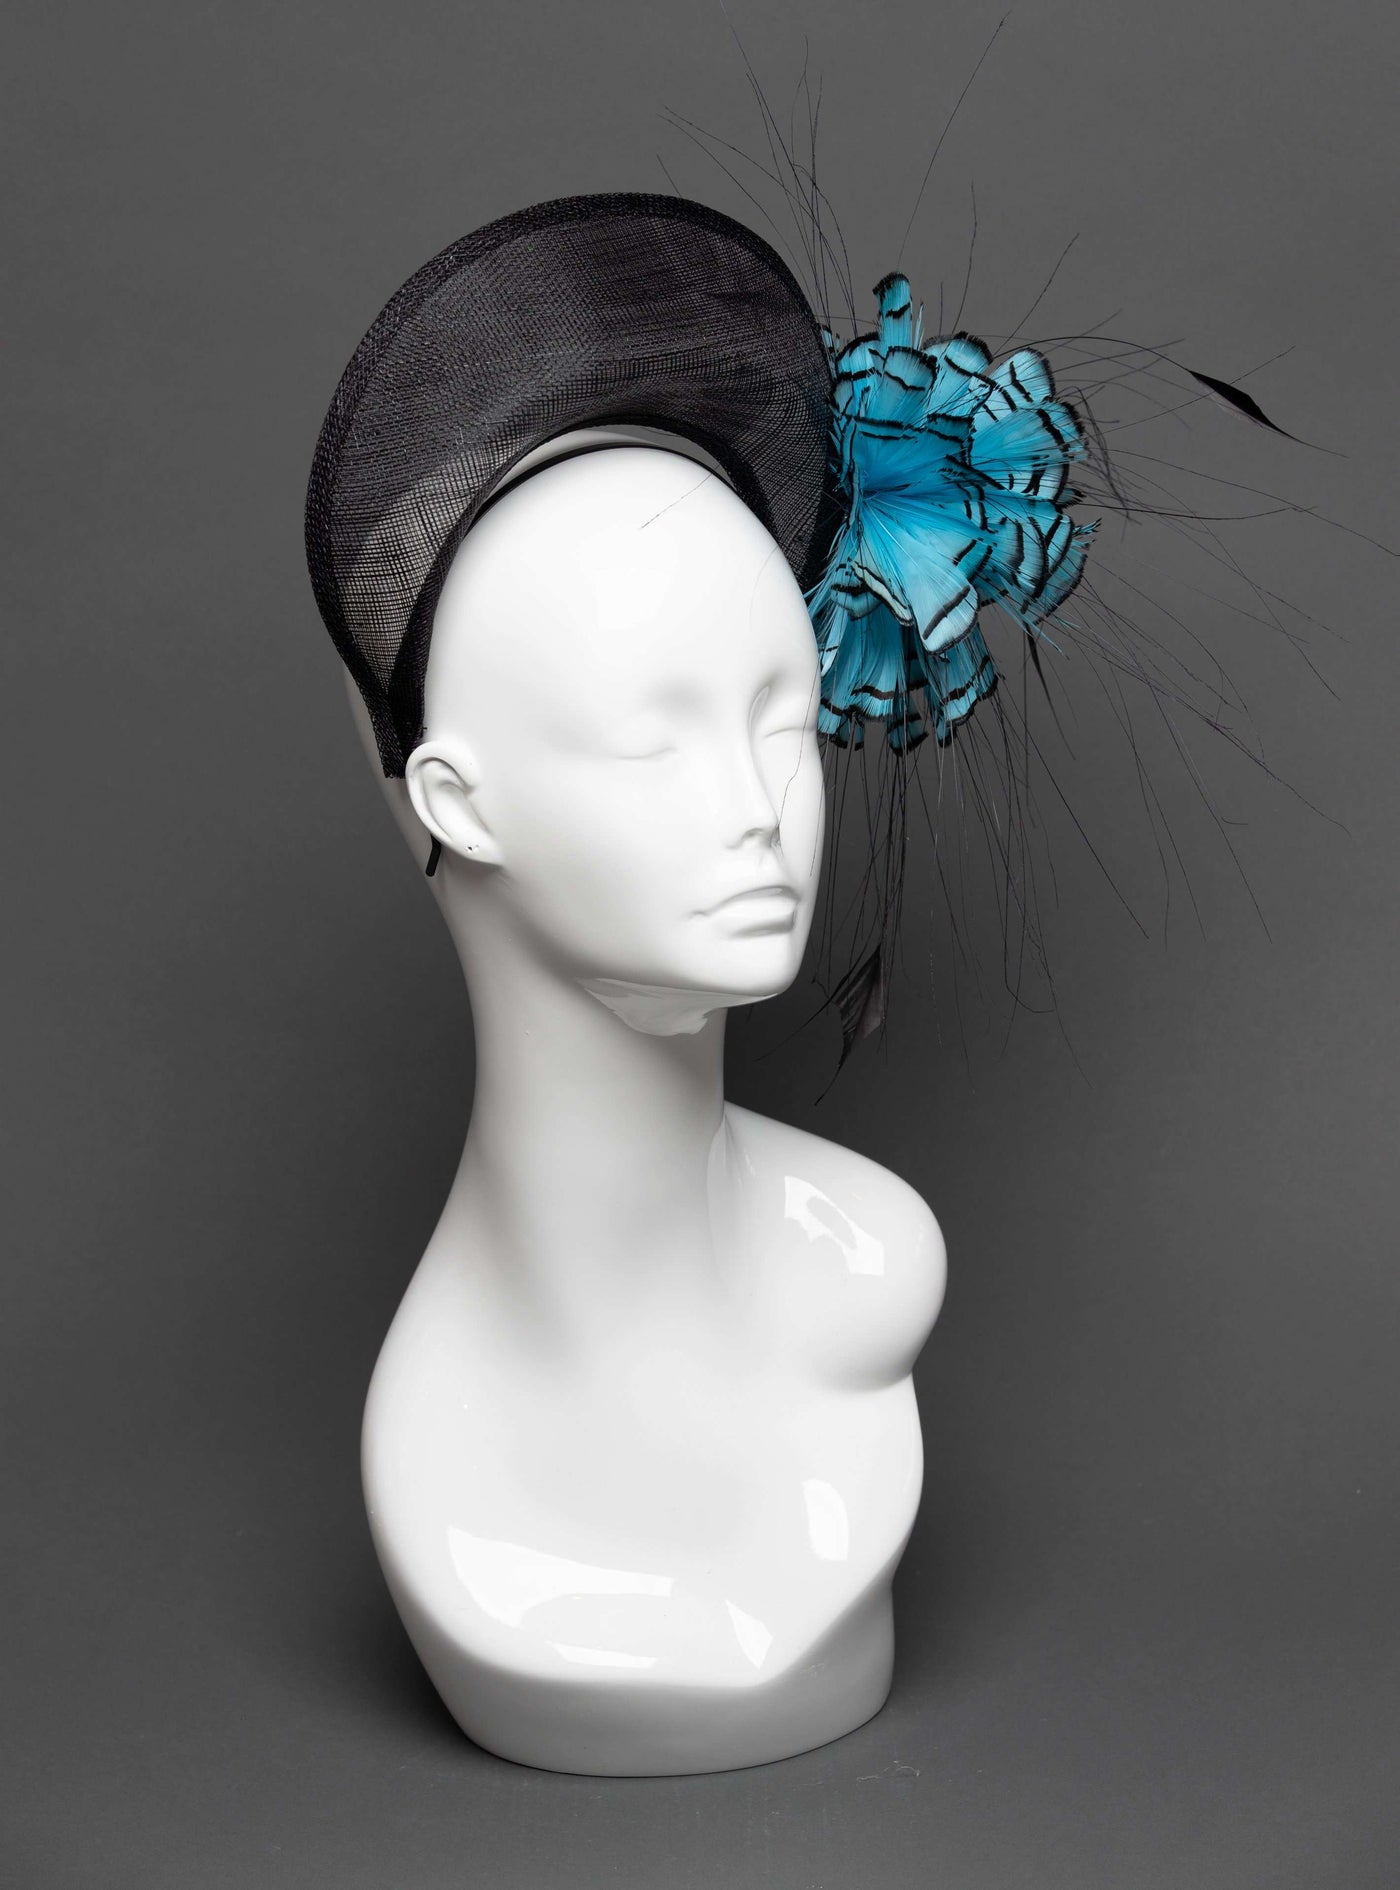 THG2792 - Black Crown Headband with Blue Feather Design - The Hat Girls